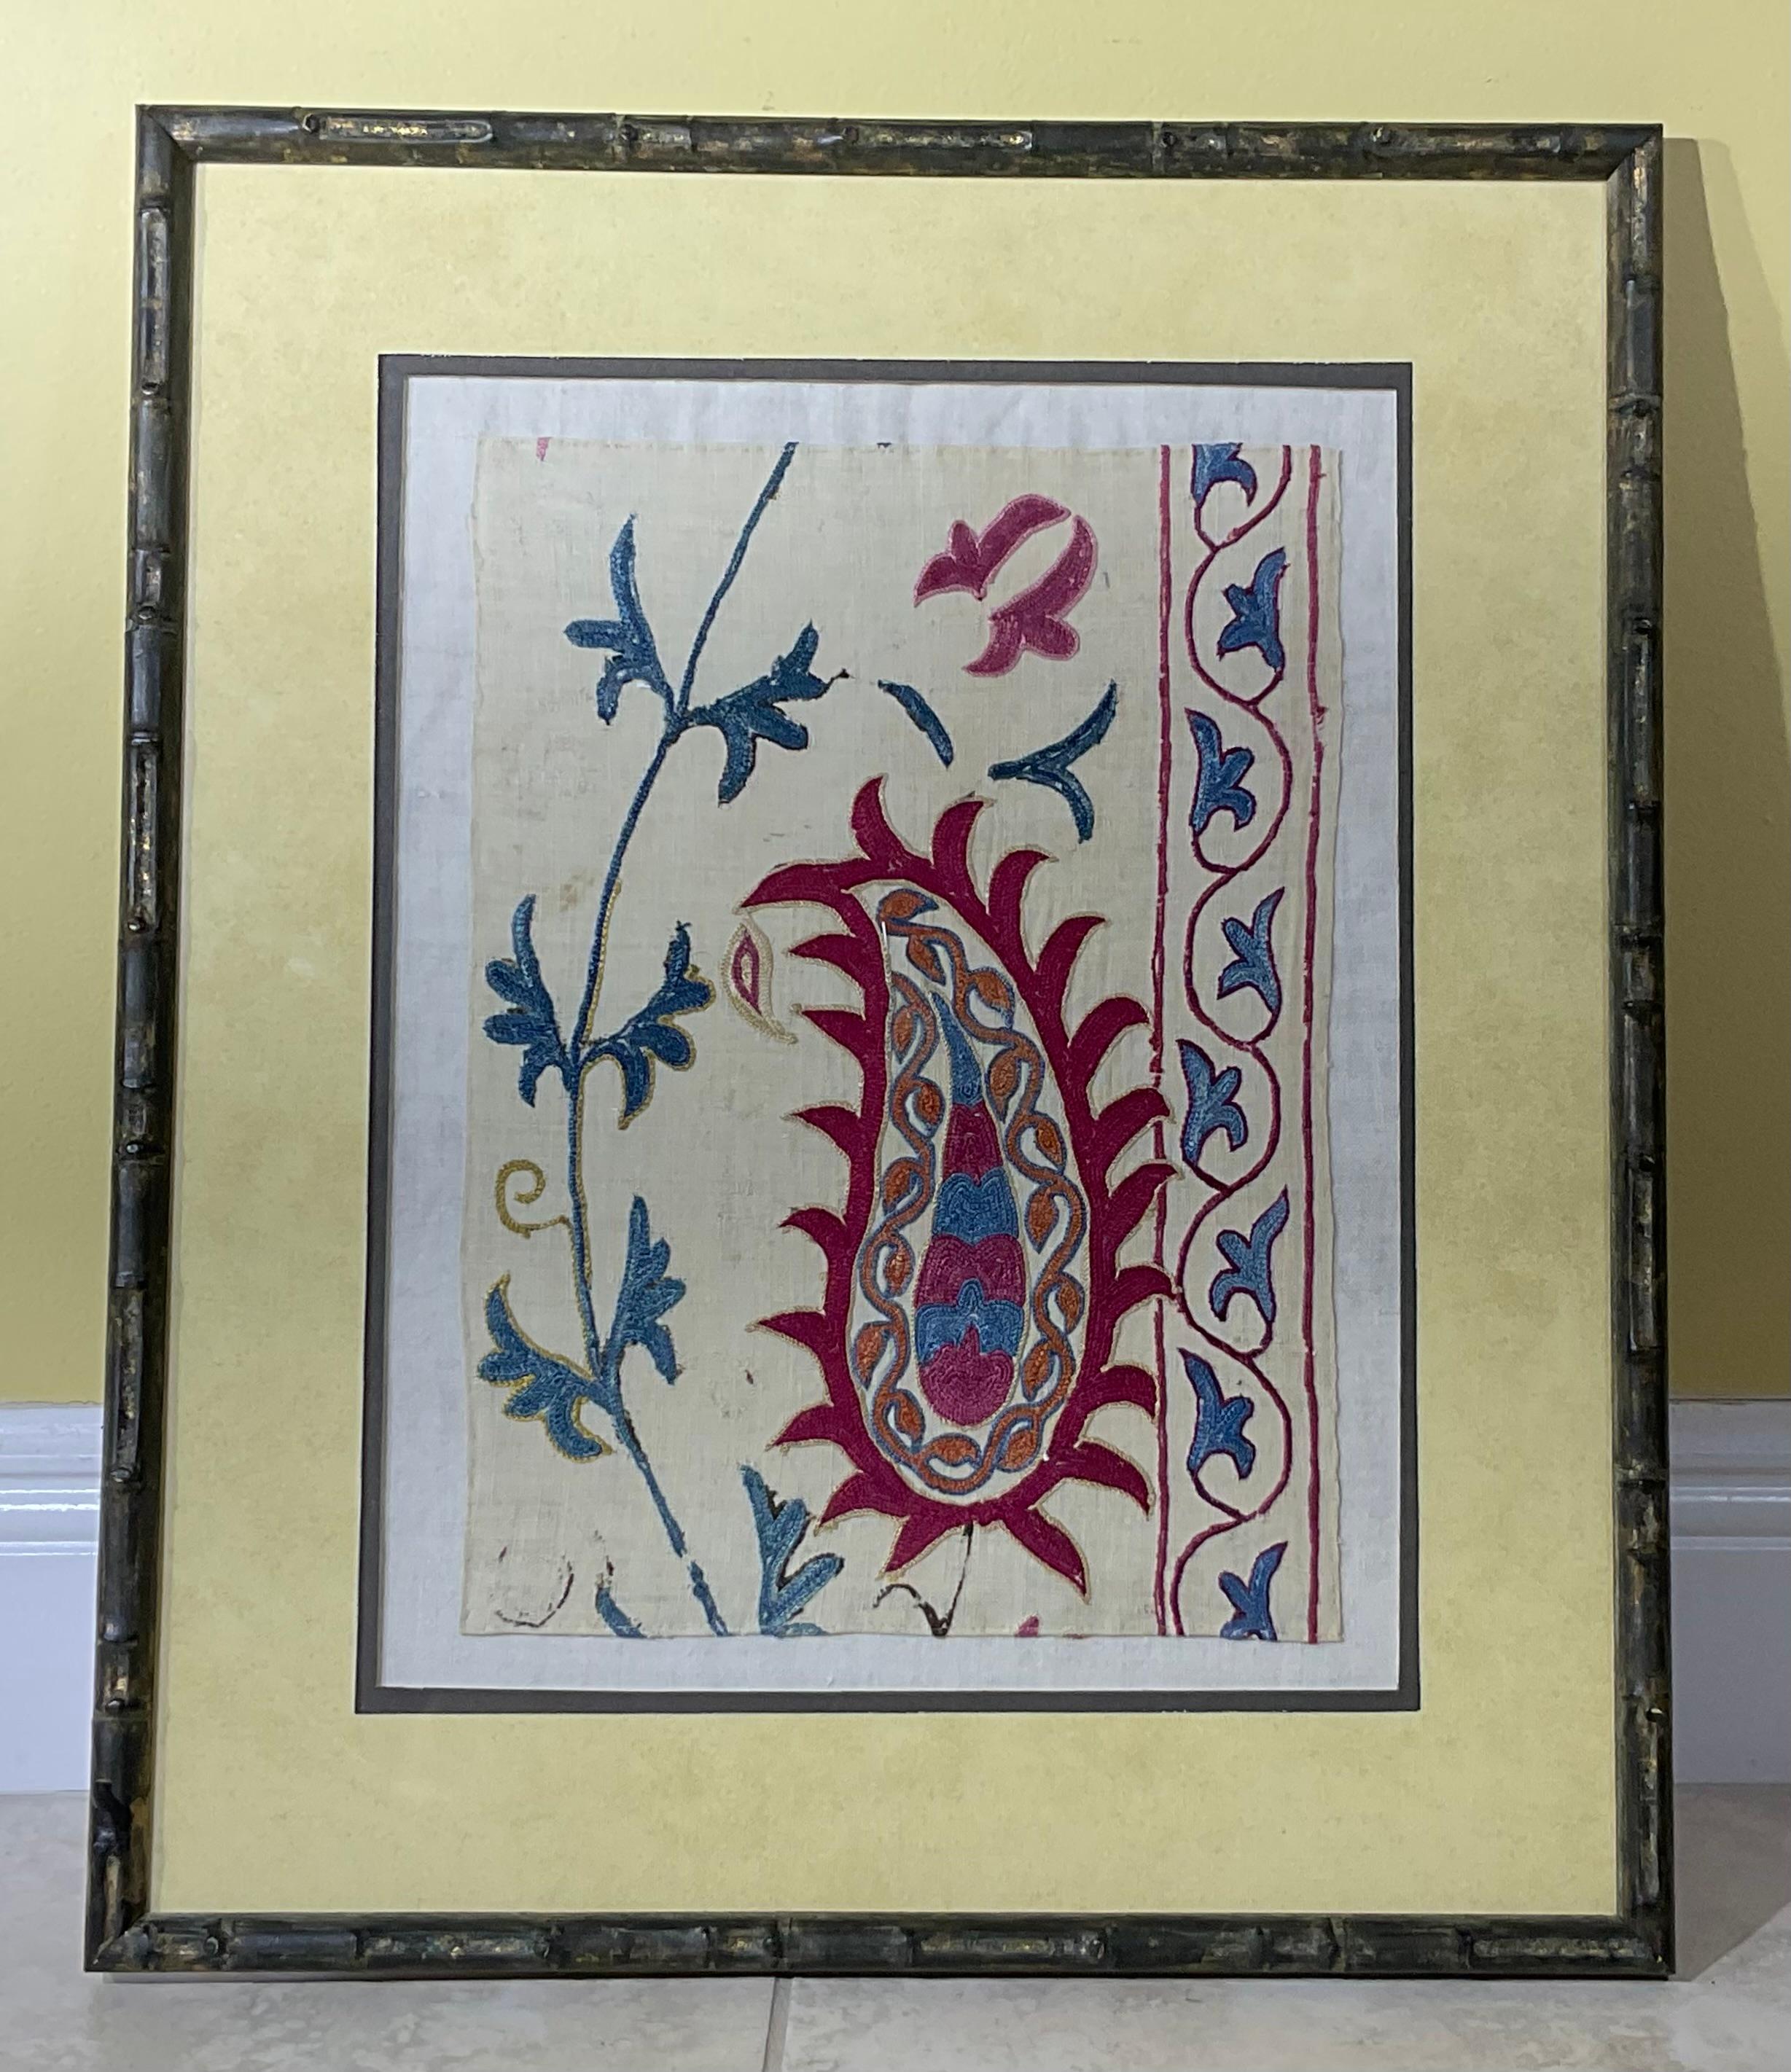 Exceptional antique hand embroidery Suzani textile, beautiful purple and indigo colors , fine silk embroidery  on cotton background, all professionally hand sewn to linen backing , quality bamboo style solid wood frame , ready to hang .
One of a